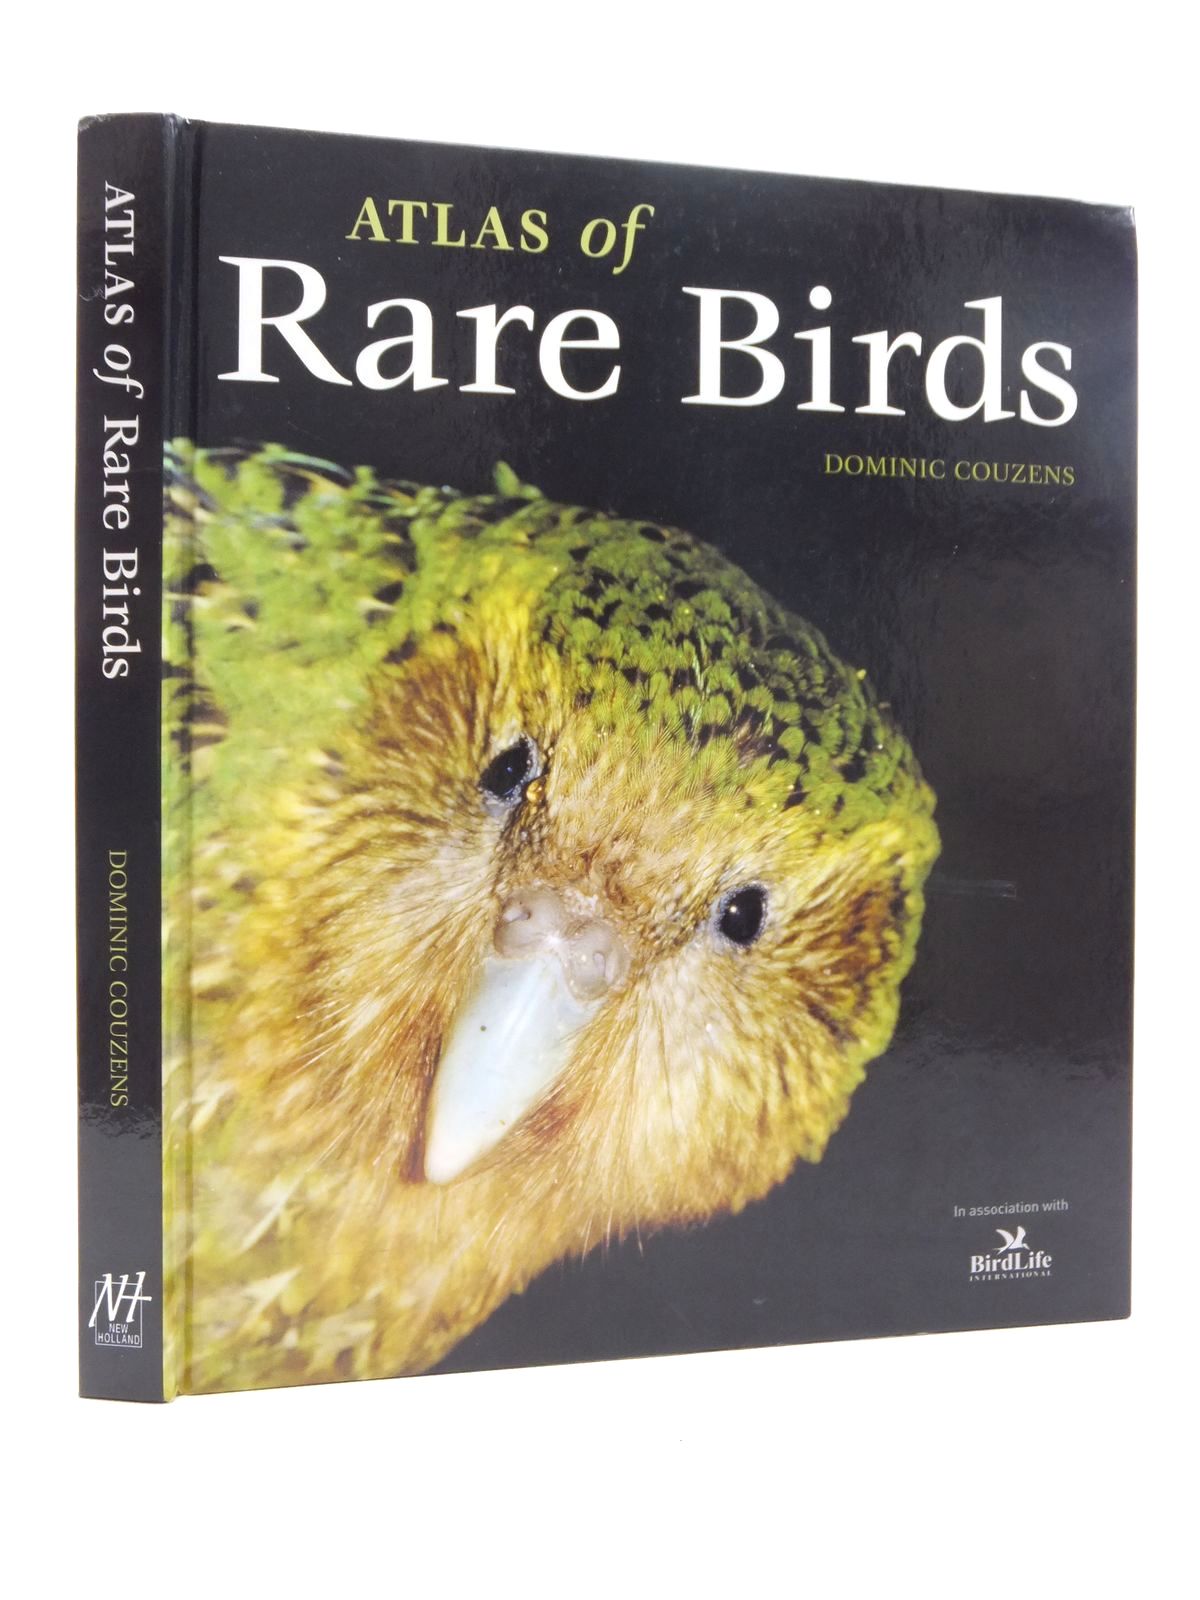 Photo of ATLAS OF RARE BIRDS written by Couzens, Dominic published by New Holland, Birdlife International (STOCK CODE: 1610034)  for sale by Stella & Rose's Books